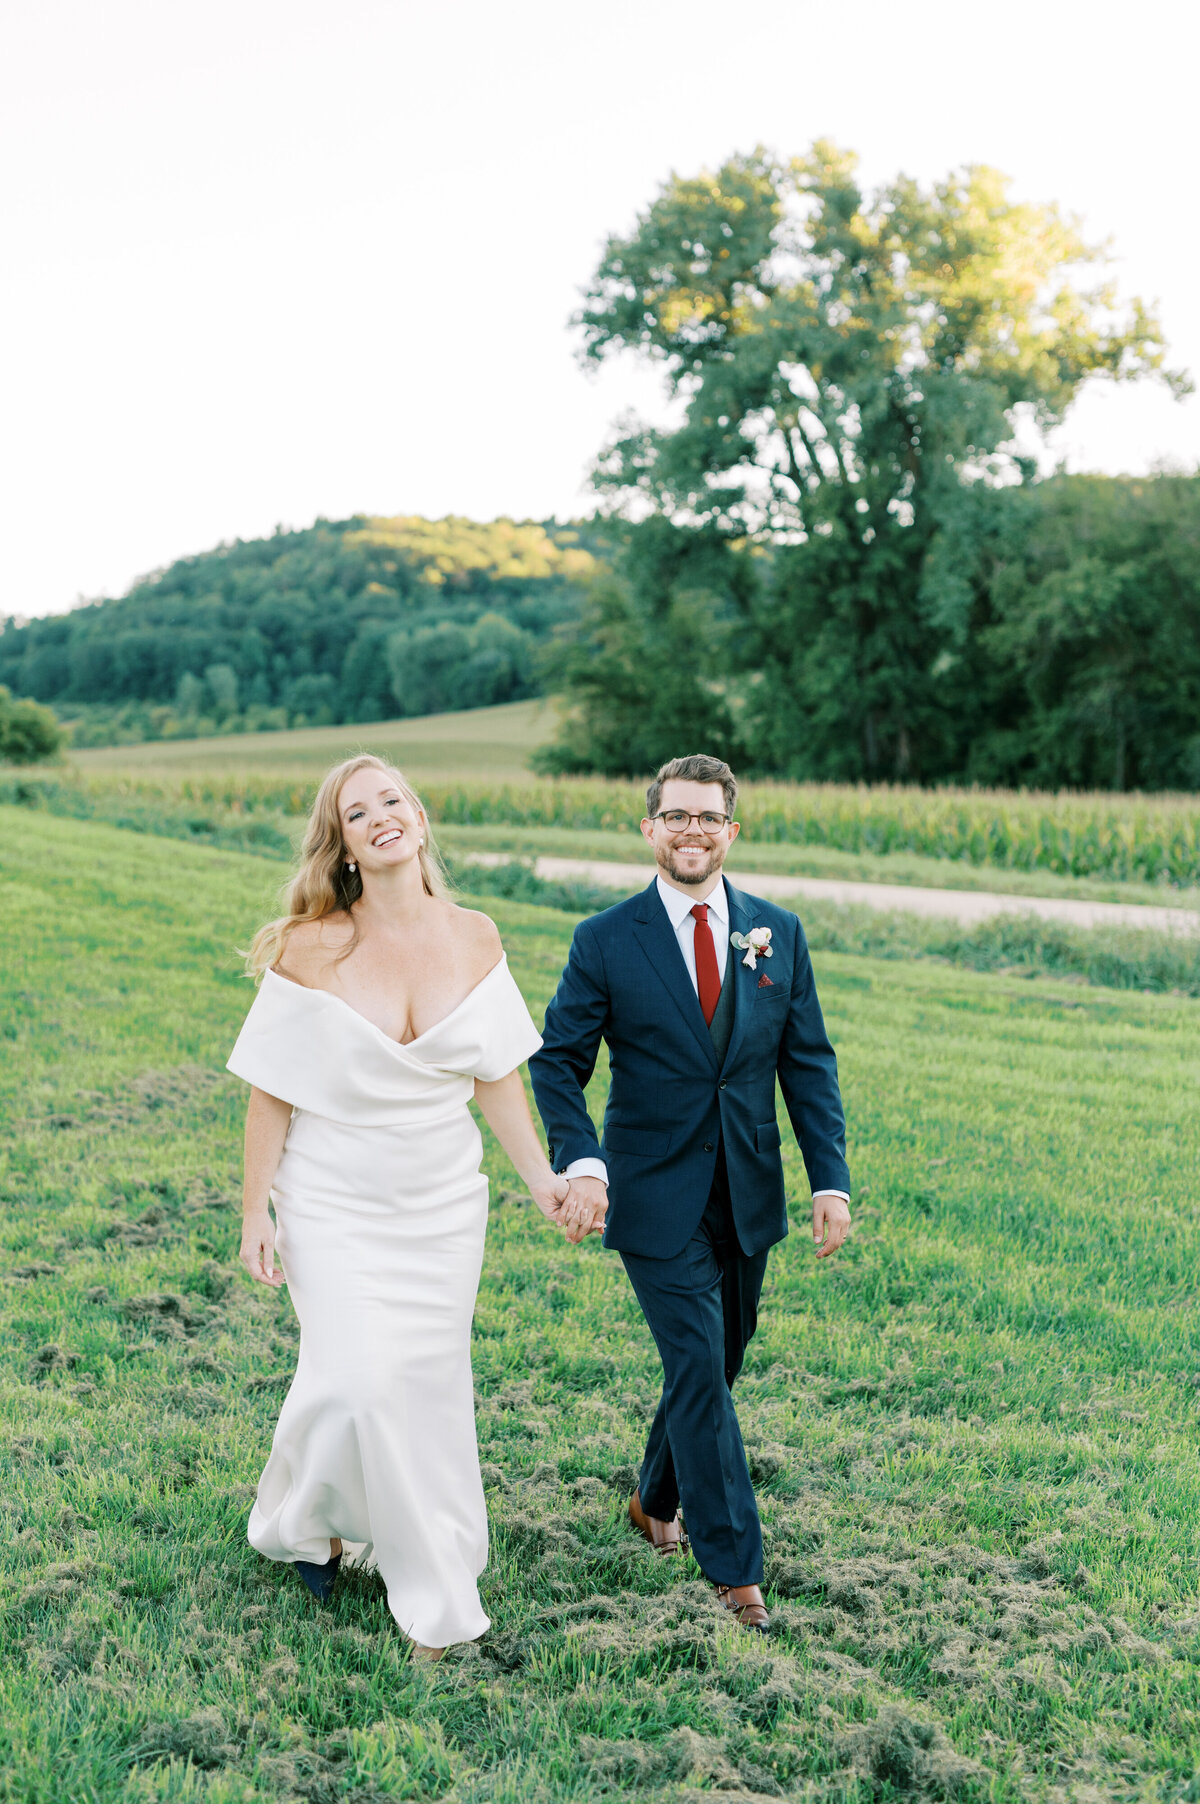 Bride and groom walking together at Willow Brooke Farm